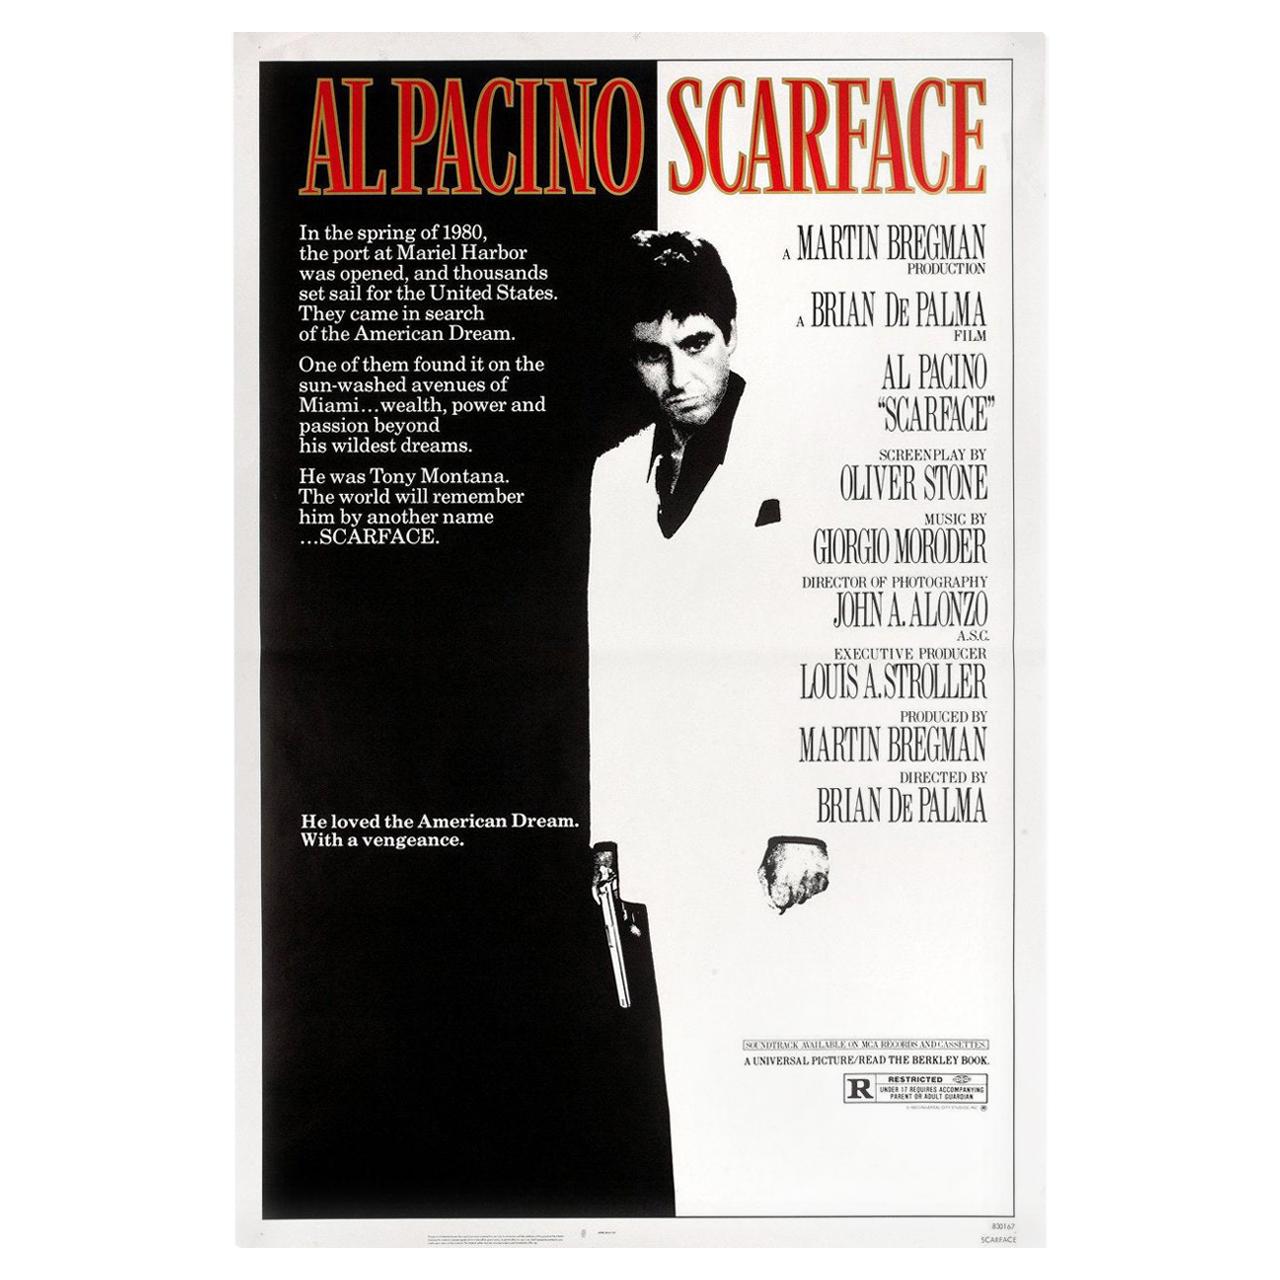 Scarface 1983 U.S. One Sheet Film Poster